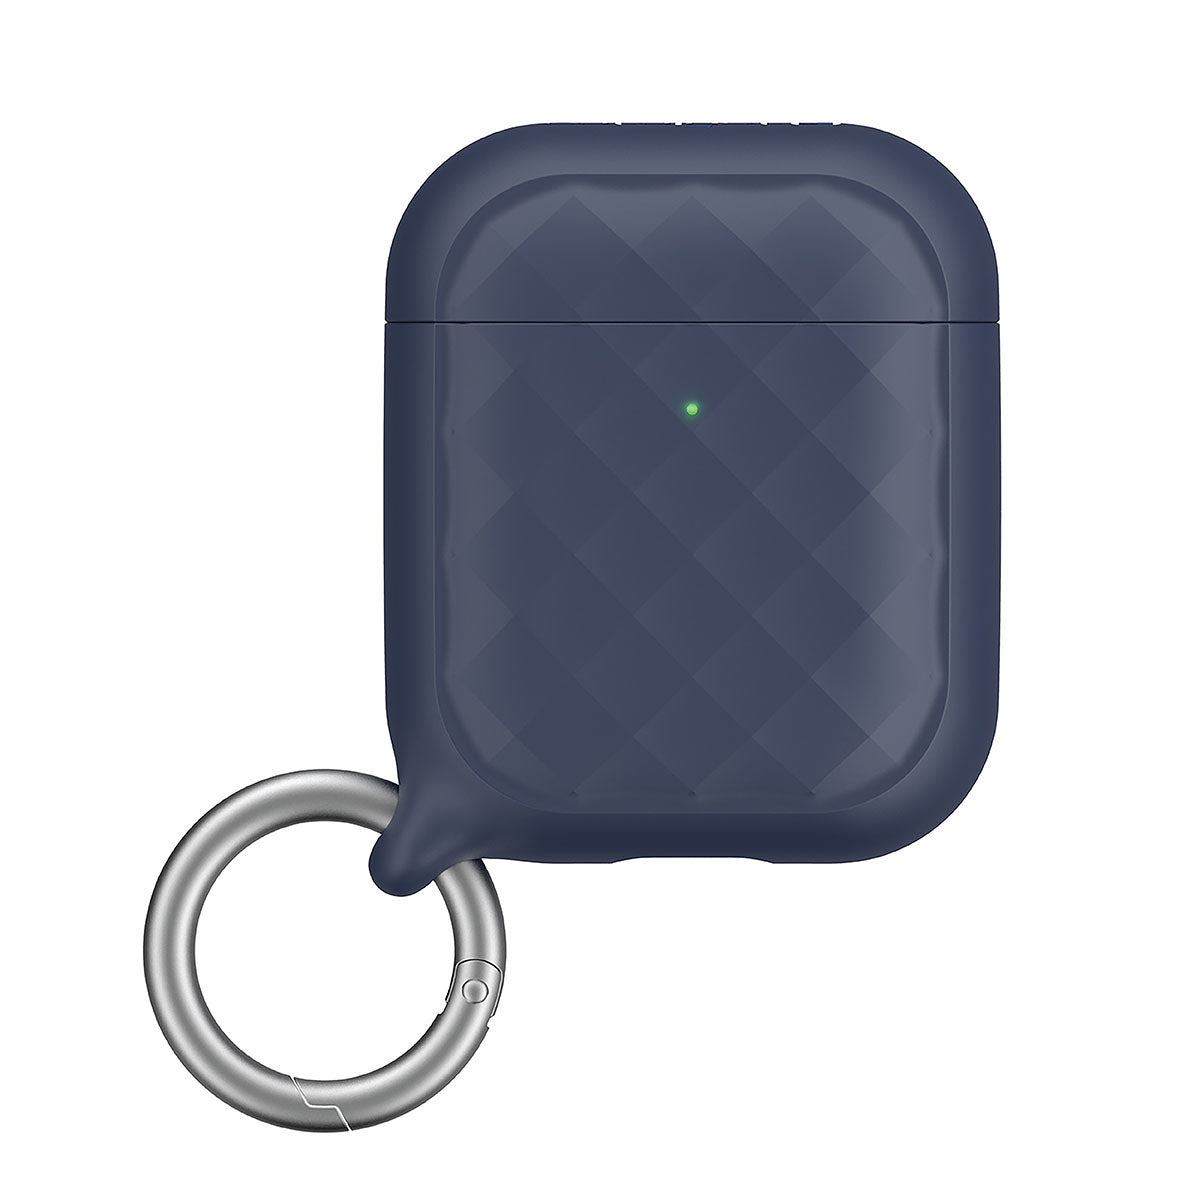 Catalyst airpods gen2/1 case eing clip carabiner showing the side of the case with ring clip carabiner attached